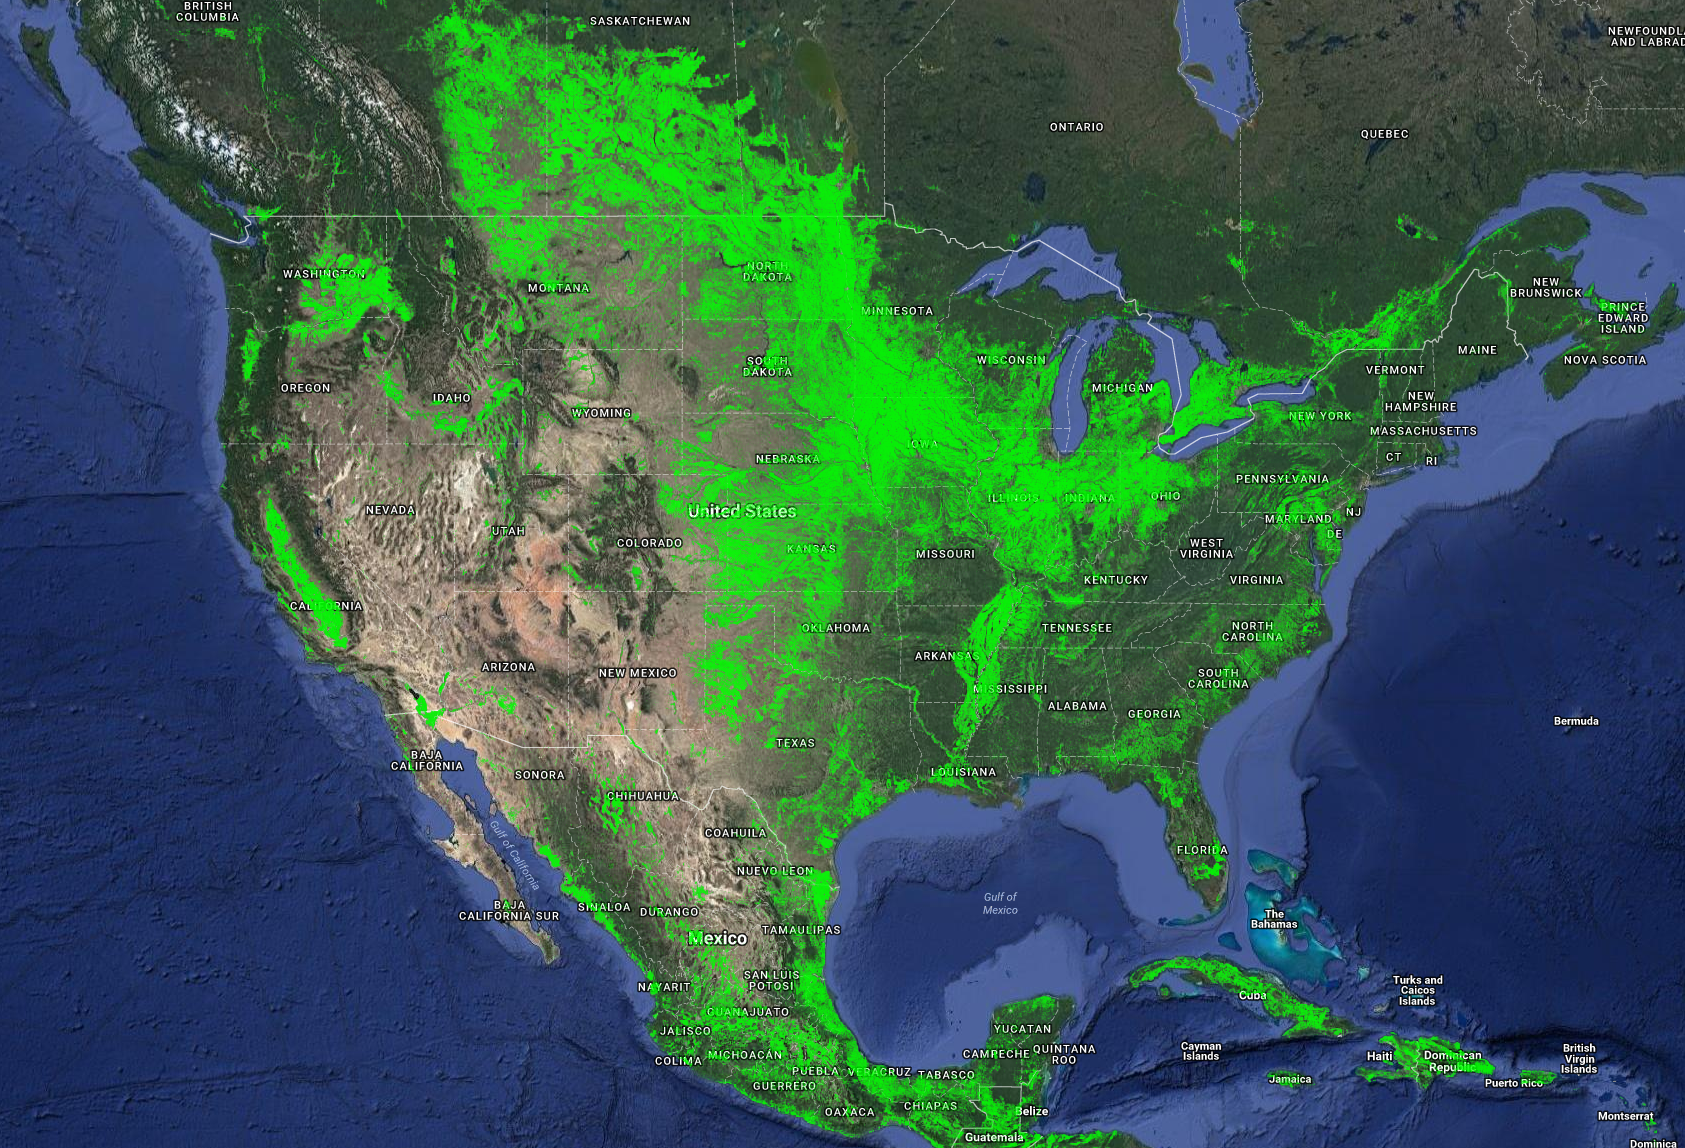 A map of American cropland, courtesy of USGS. Cropland is illustrated in bright green over a satellite map North America.